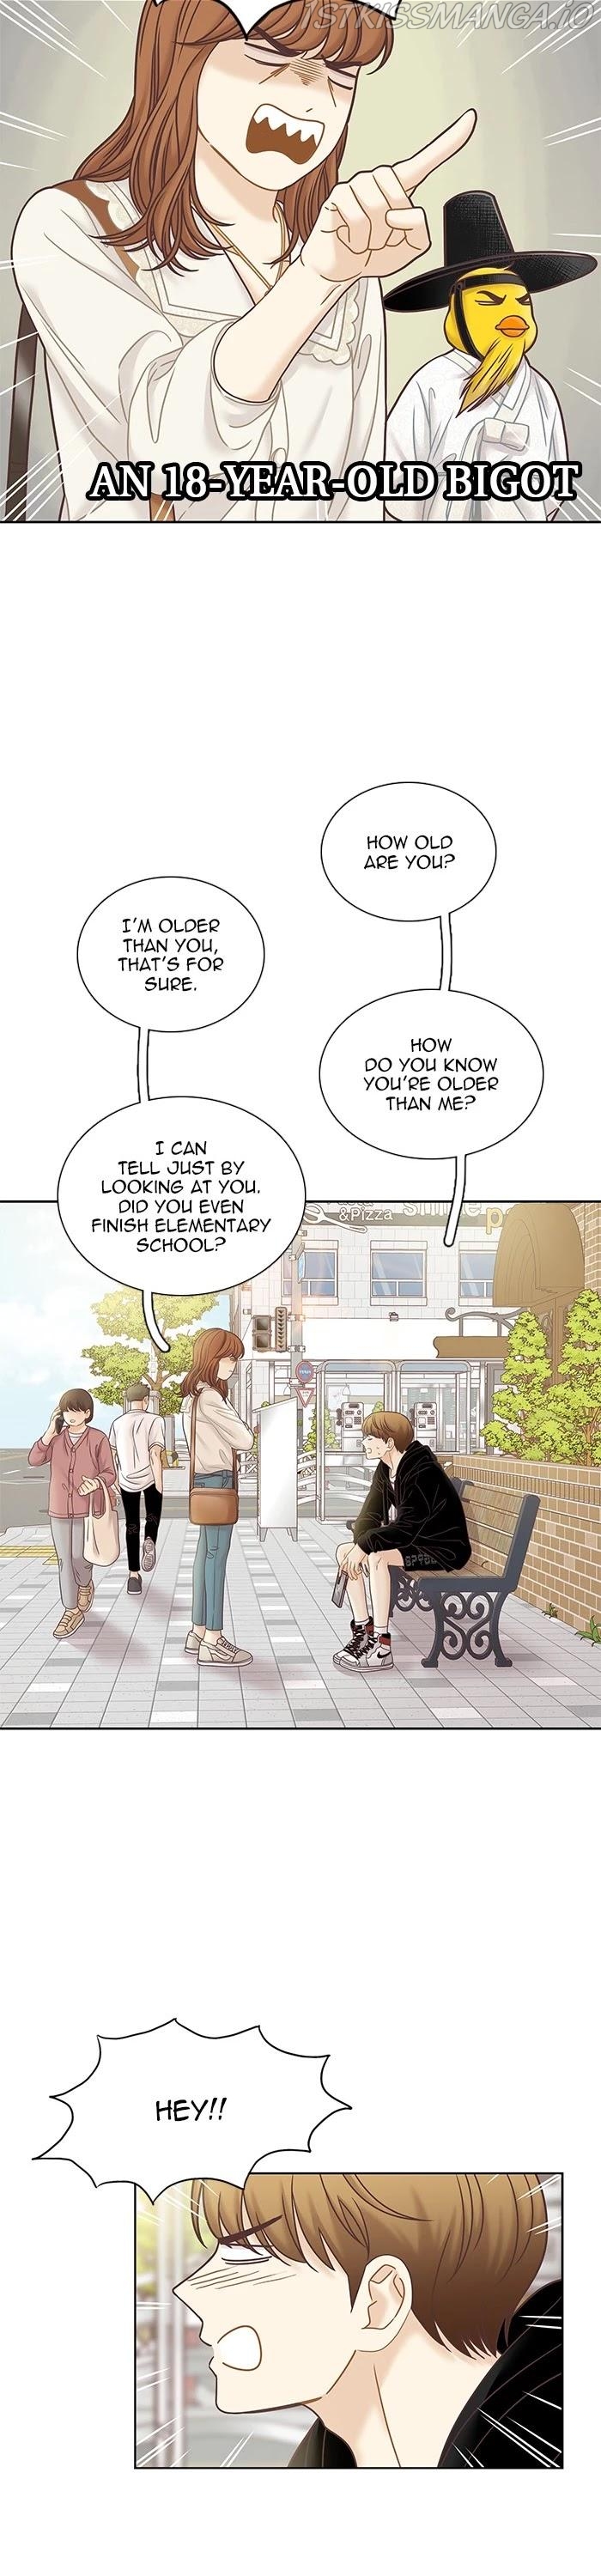 Girl’s World ( World of Girl ) Chapter 280 - Page 12